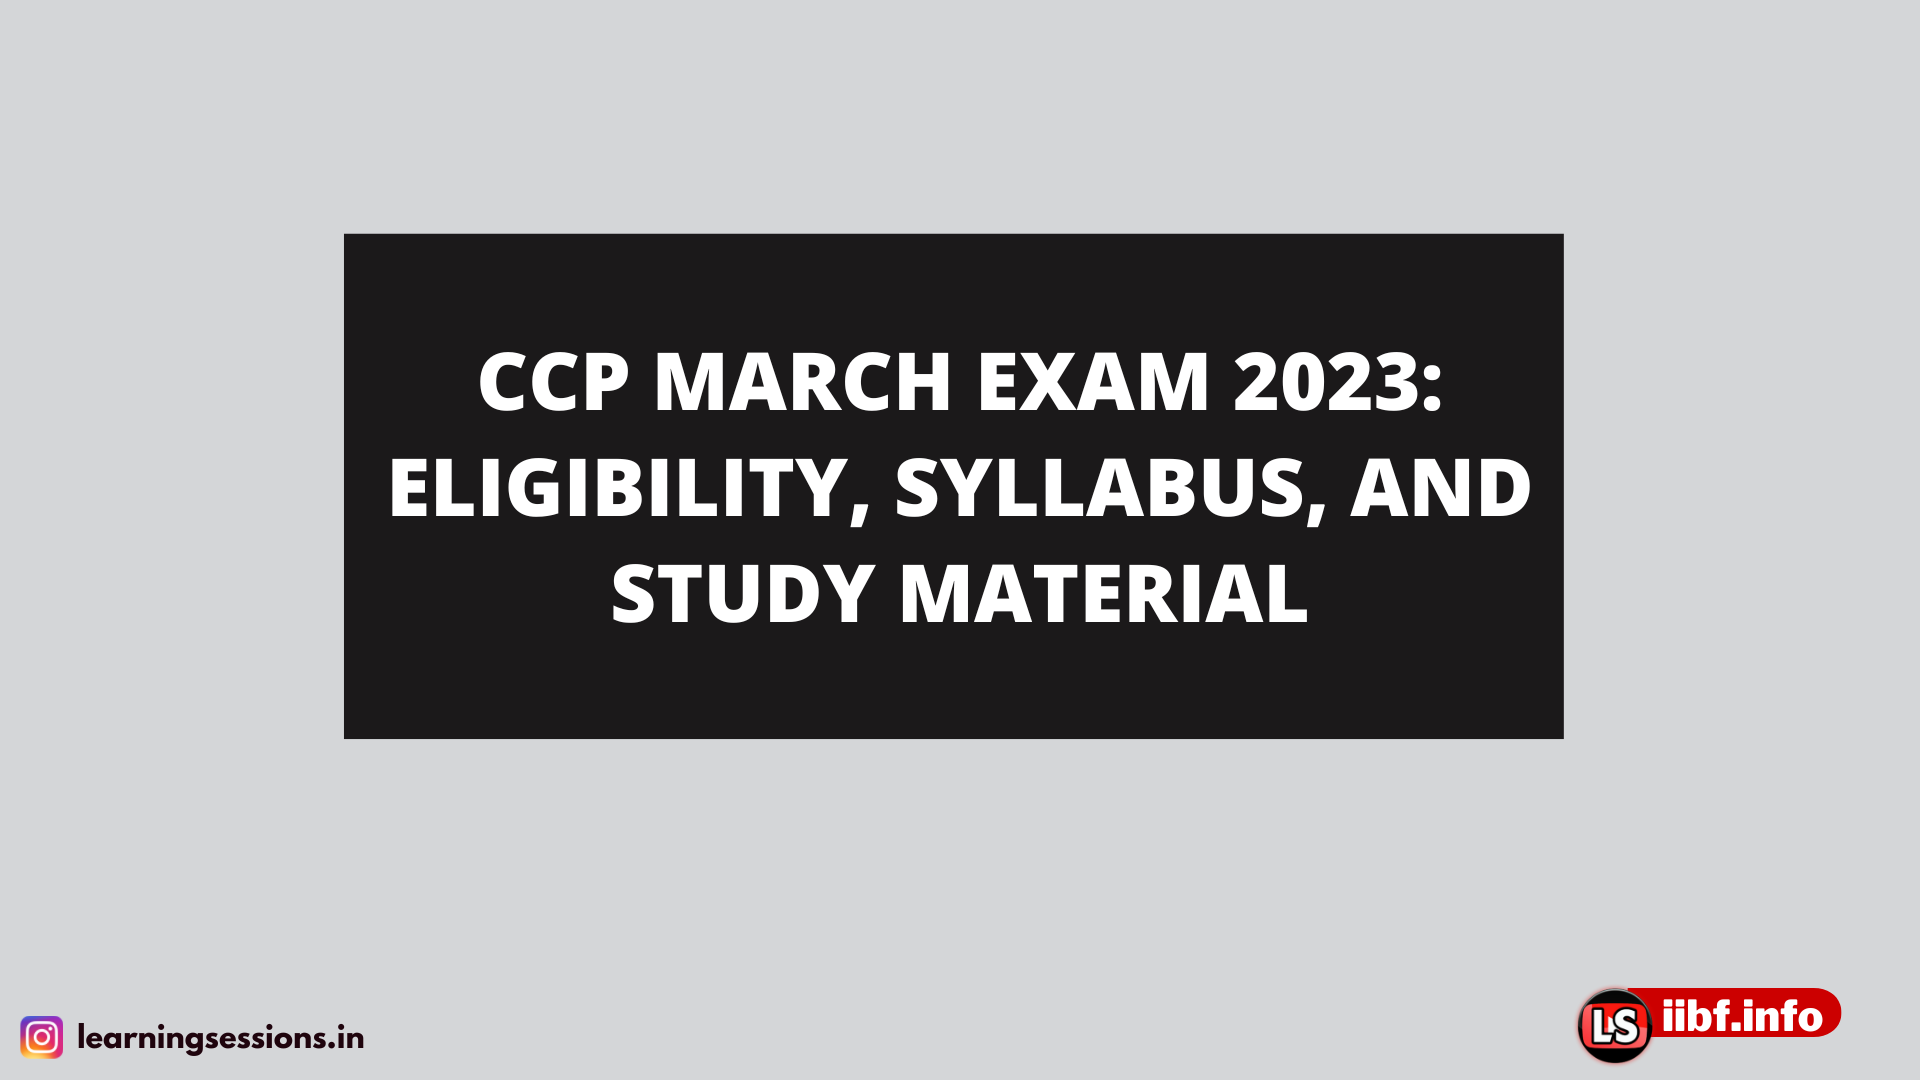 CCP MARCH EXAM 2023: ELIGIBILITY, SYLLABUS, AND STUDY MATERIAL